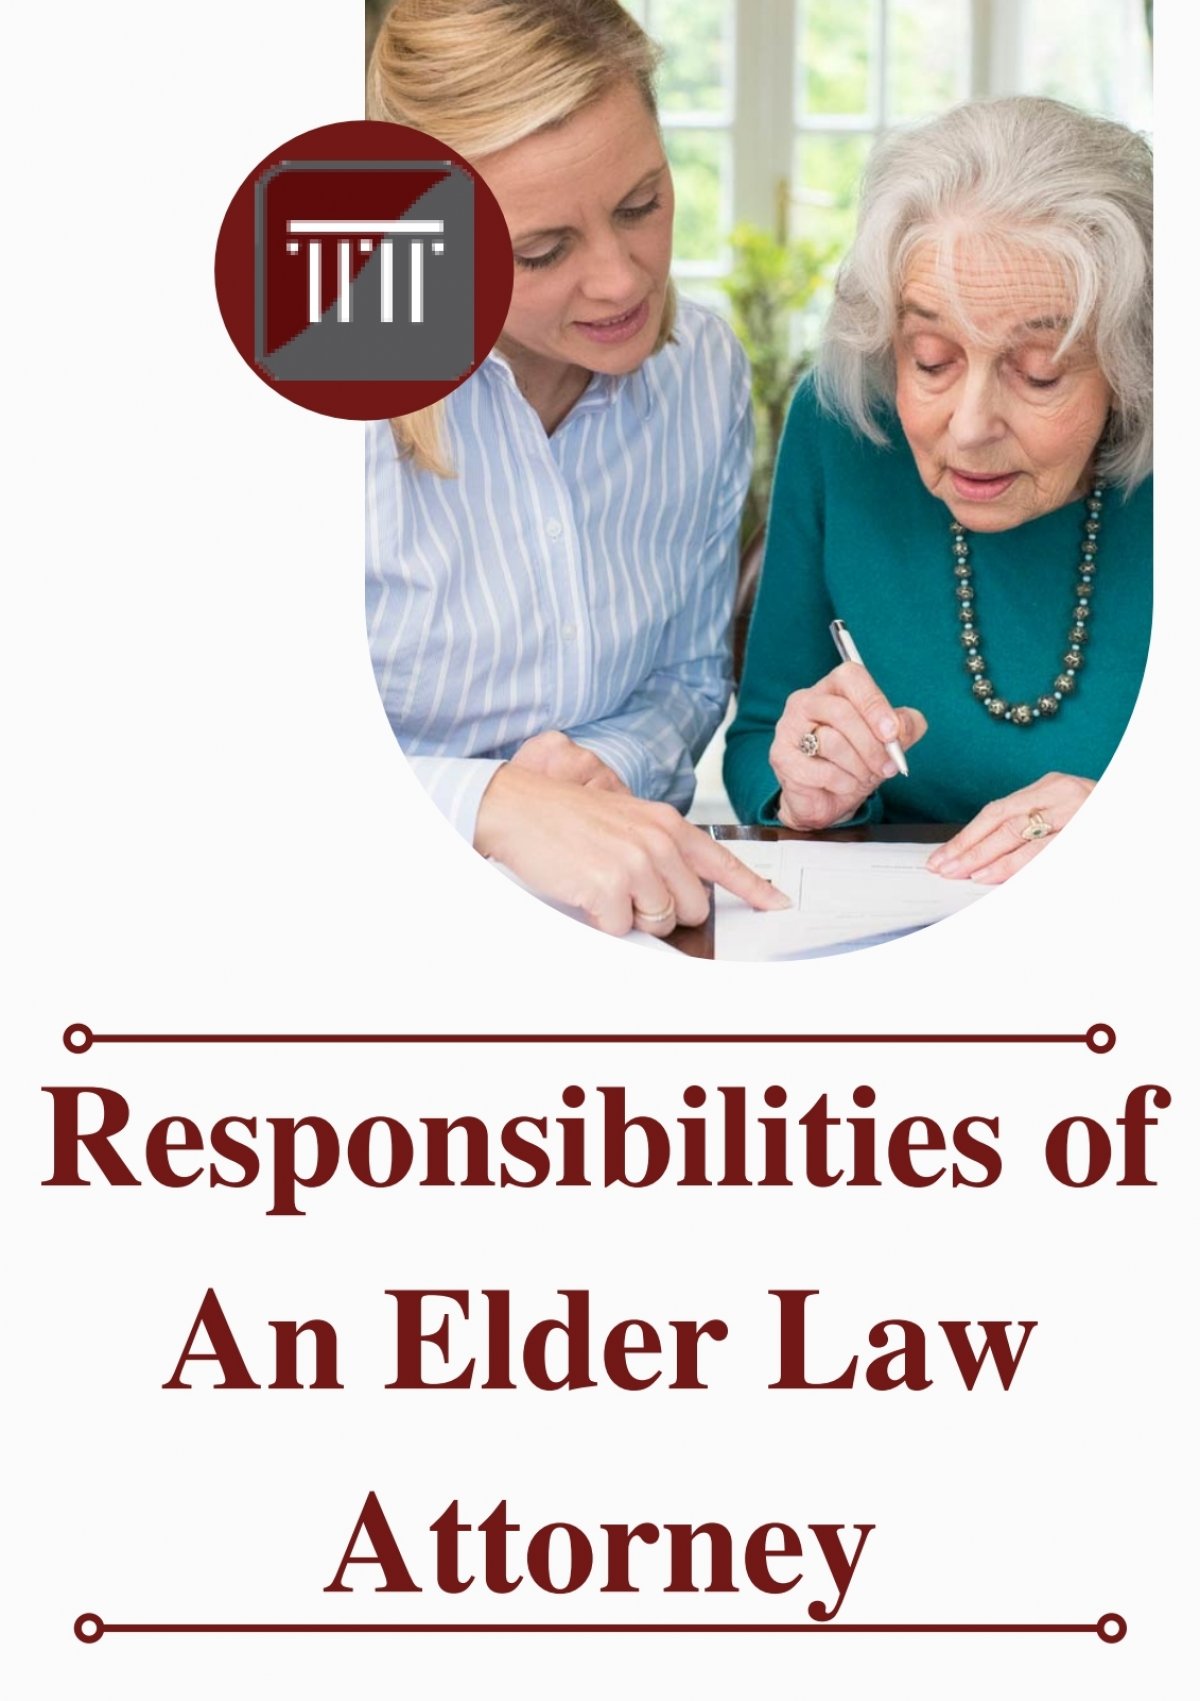 The Responsibilities Of An Elder Law Attorney